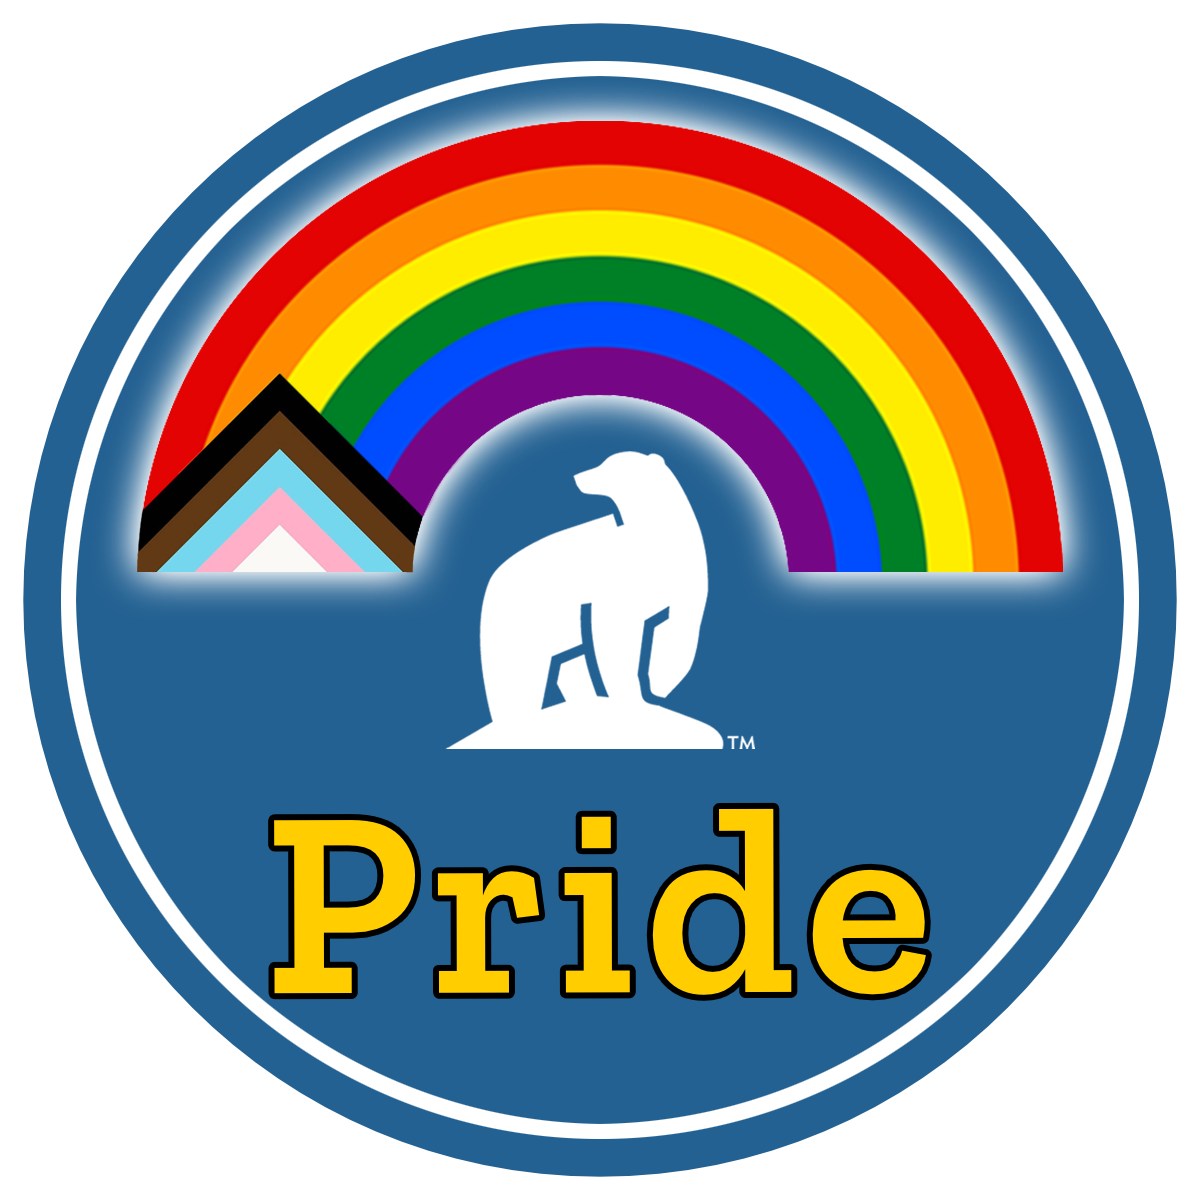 Circular blue email badge with white nanook bear and the word Pride under an arched pride flag